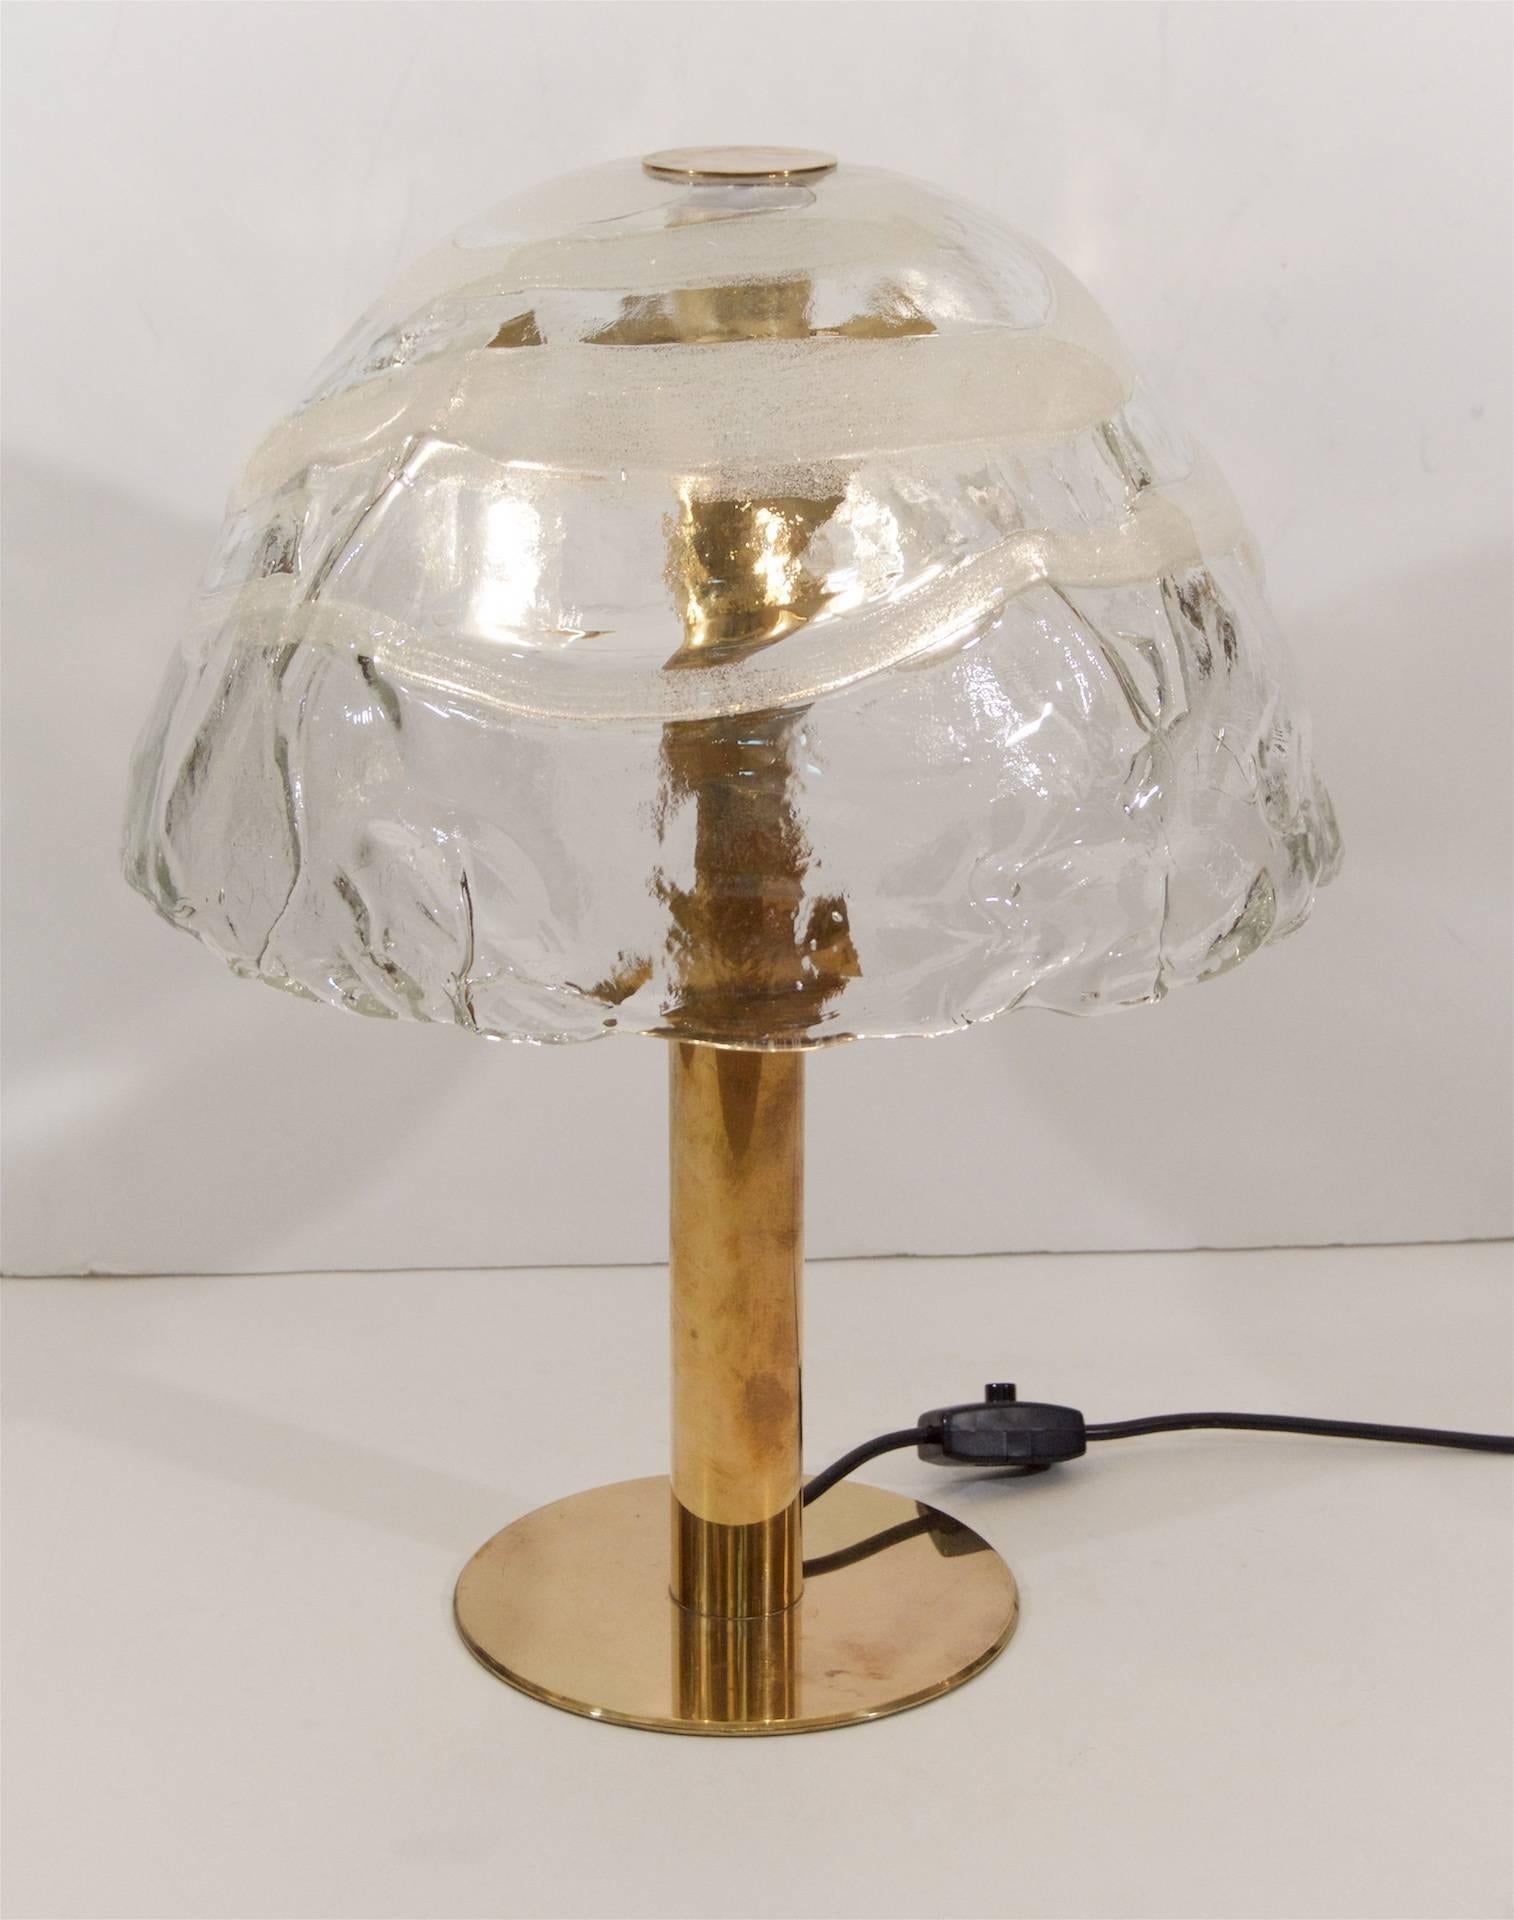 An incredibly unique brass table lamp by Kalmar with a fused glass shade. The glass shade features dramatic texture and fused glass in swirls of white.

Original wiring verified functioning, with a new American plug. Takes three medium base bulbs